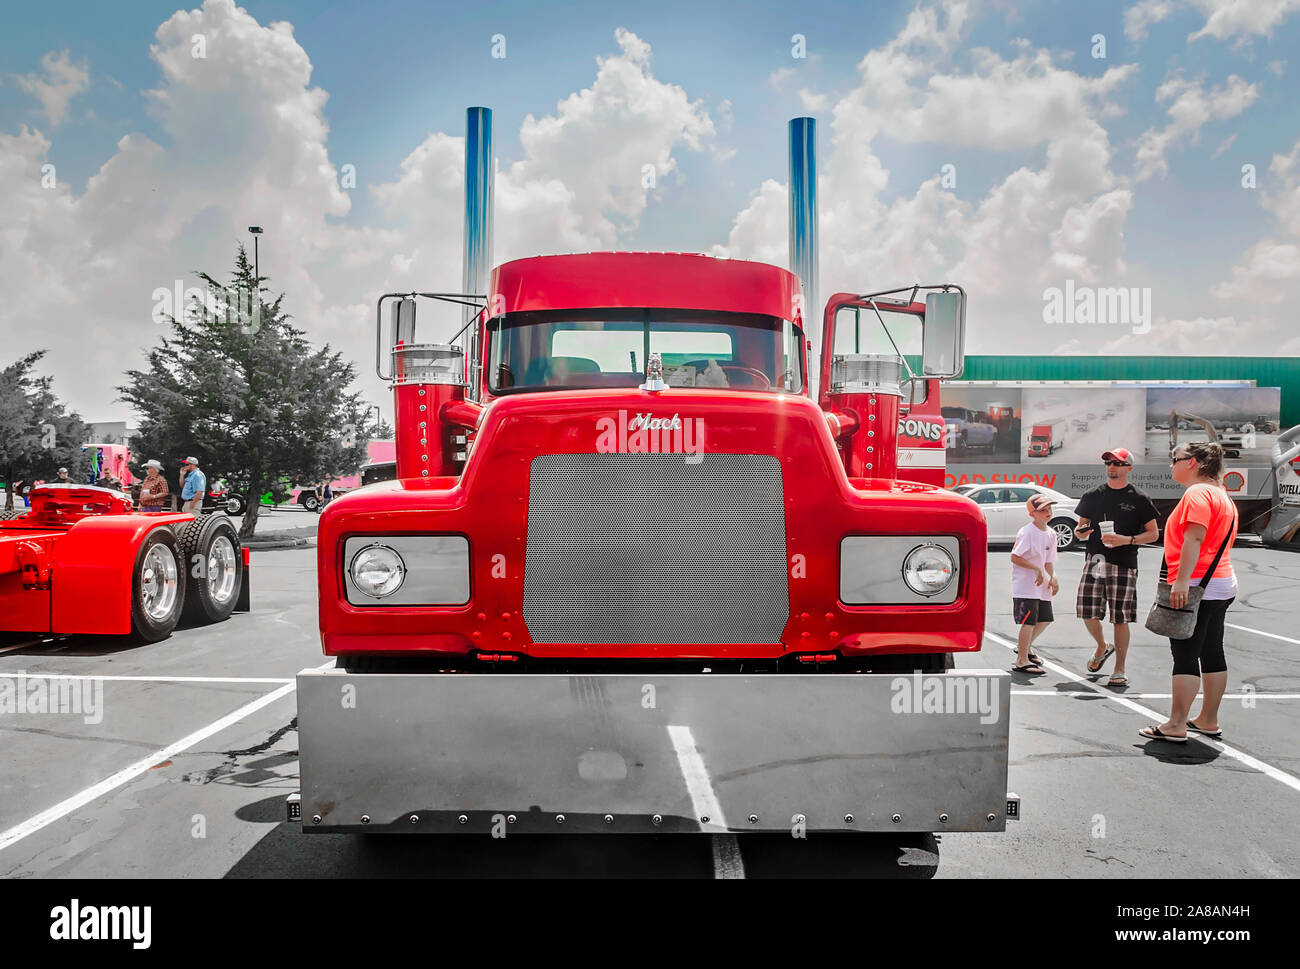 A 1991 Mack RD686 waits to be judged at the 34th annual Shell Rotella SuperRigs truck beauty contest in Joplin, Missouri. Stock Photo